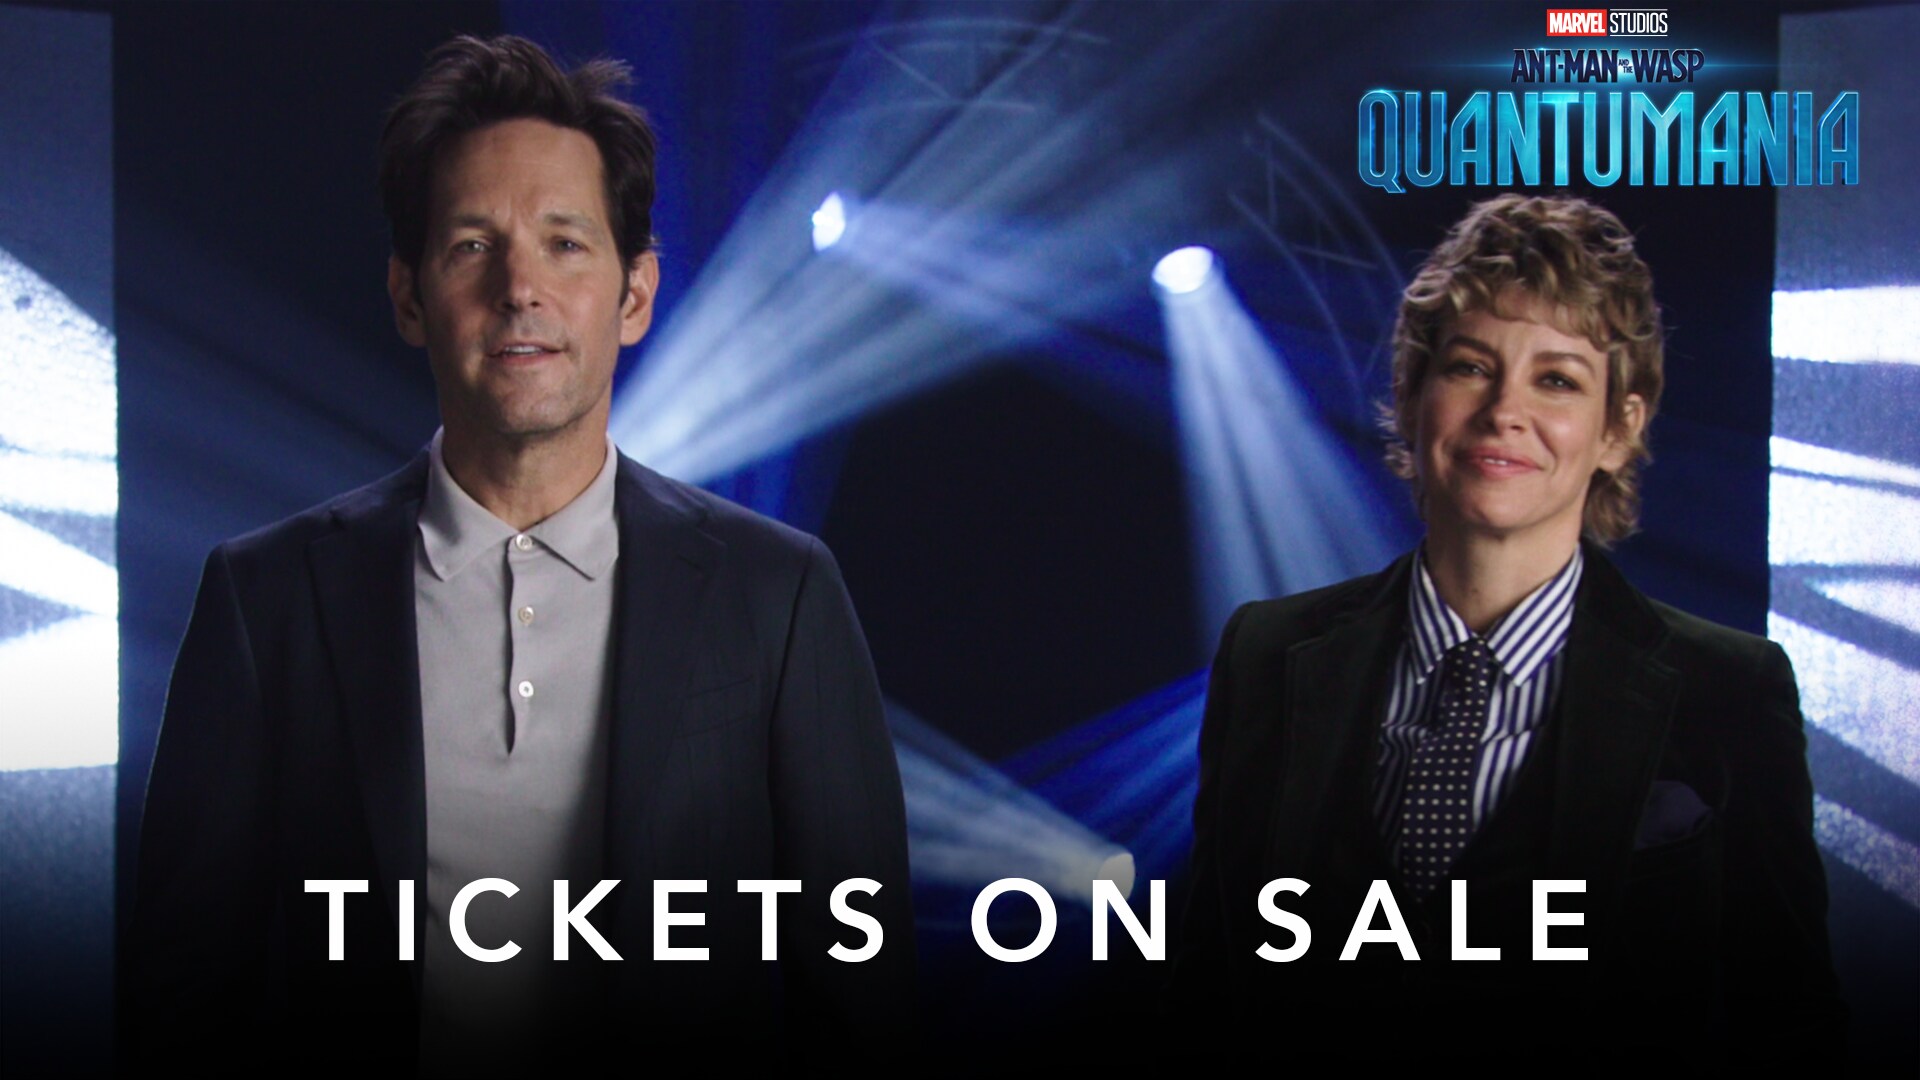 Marvel Studios' Ant-Man and The Wasp: Quantumania | Tickets On Sale